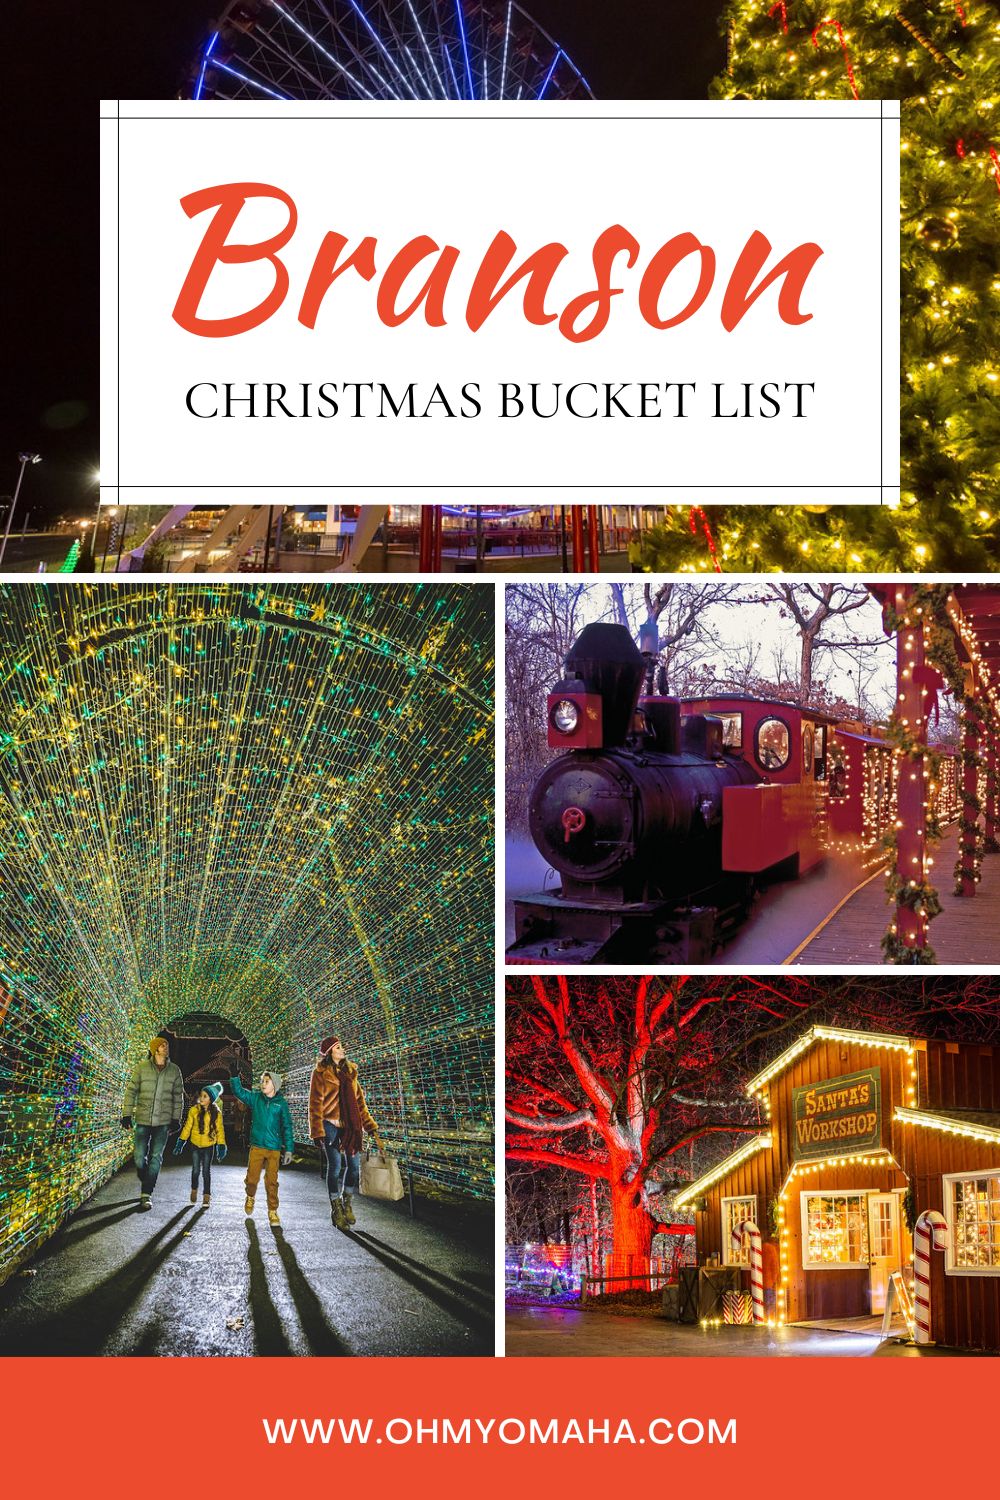 Branson Christmas - A bucket list of fun things to see and do in Branson during the holiday season